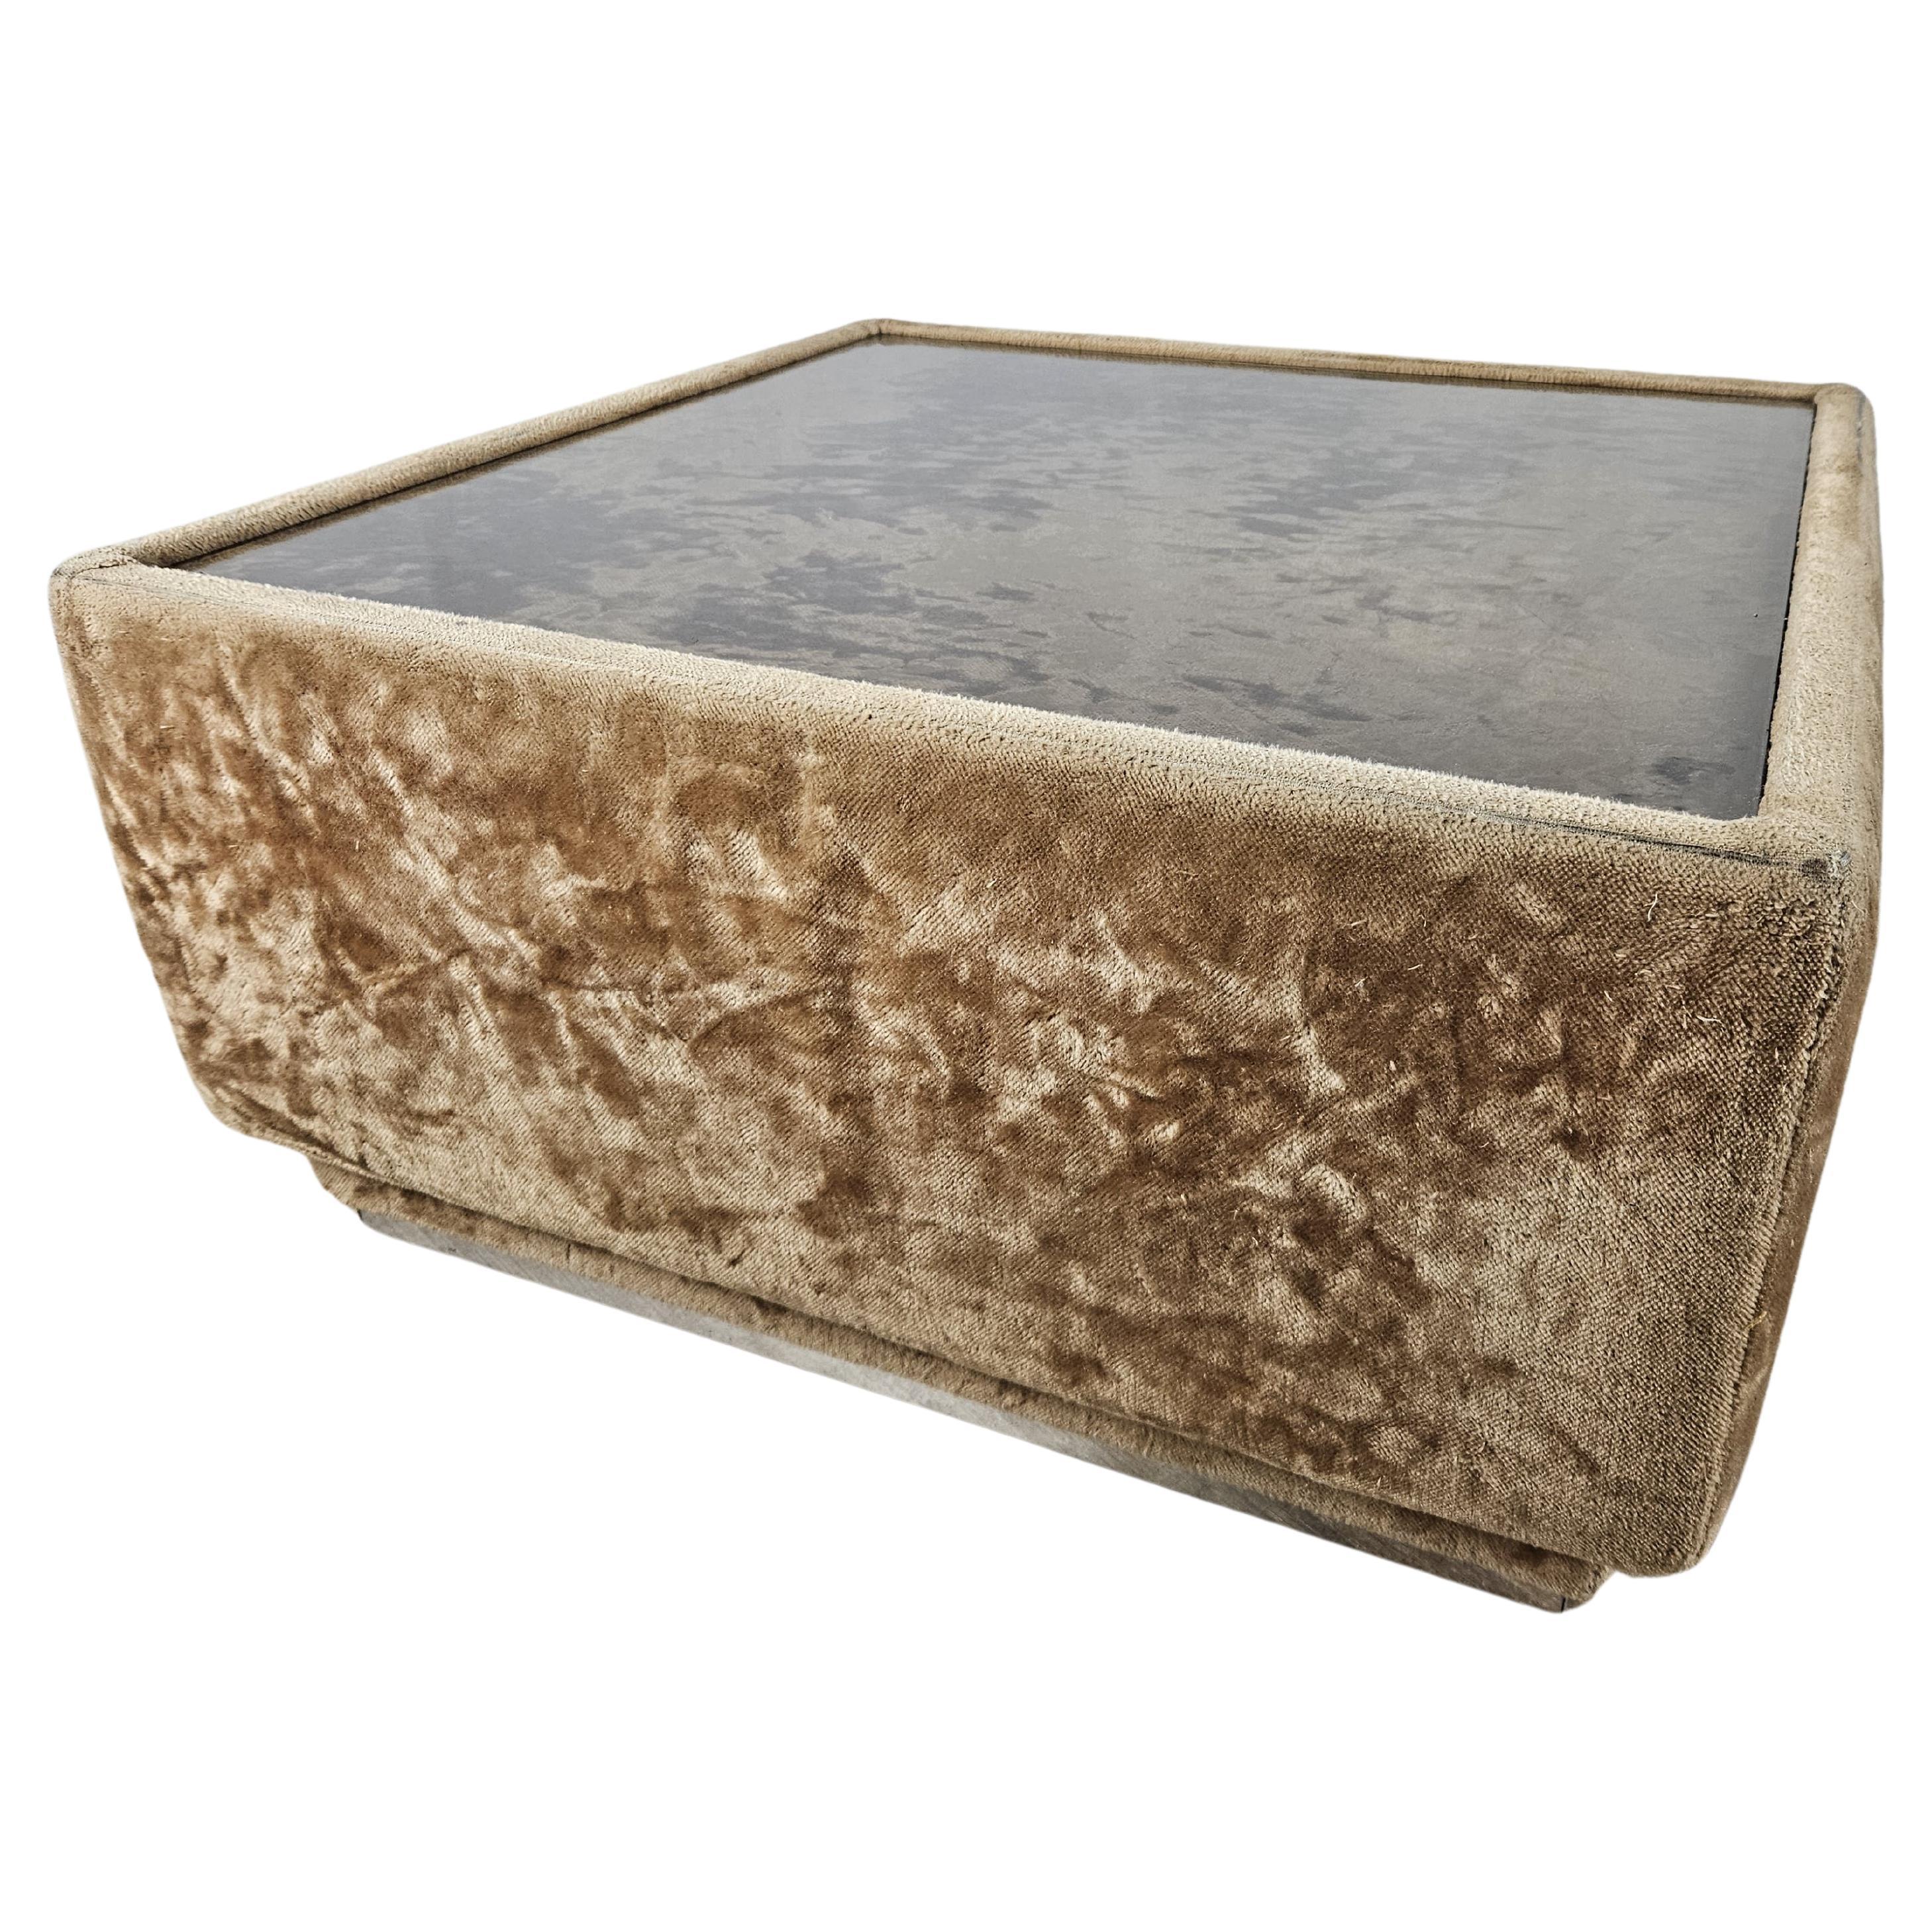 Fabric-covered 1970s coffee table with glass top